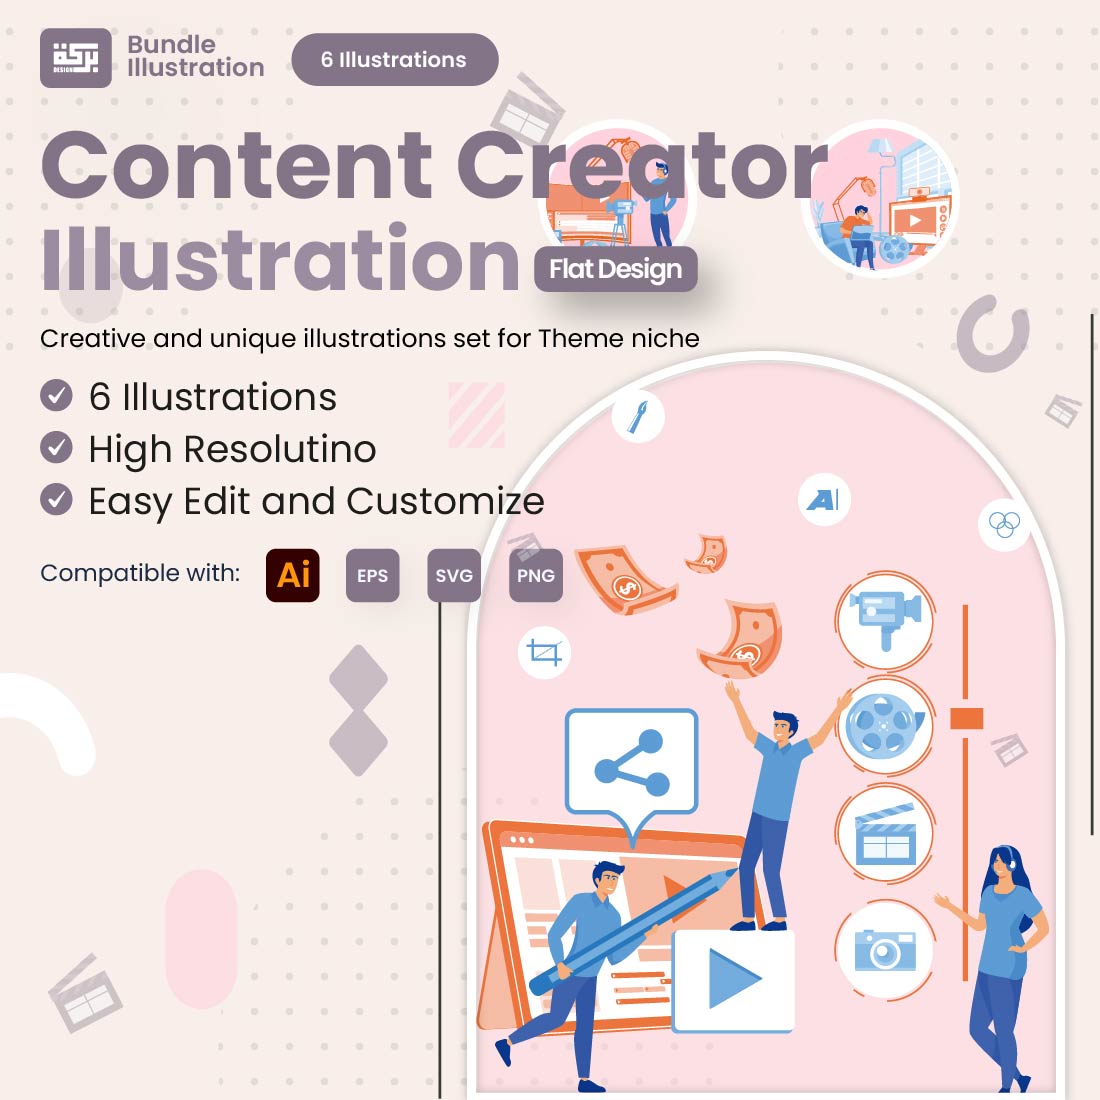 Illustration of Content Creator Concept cover image.